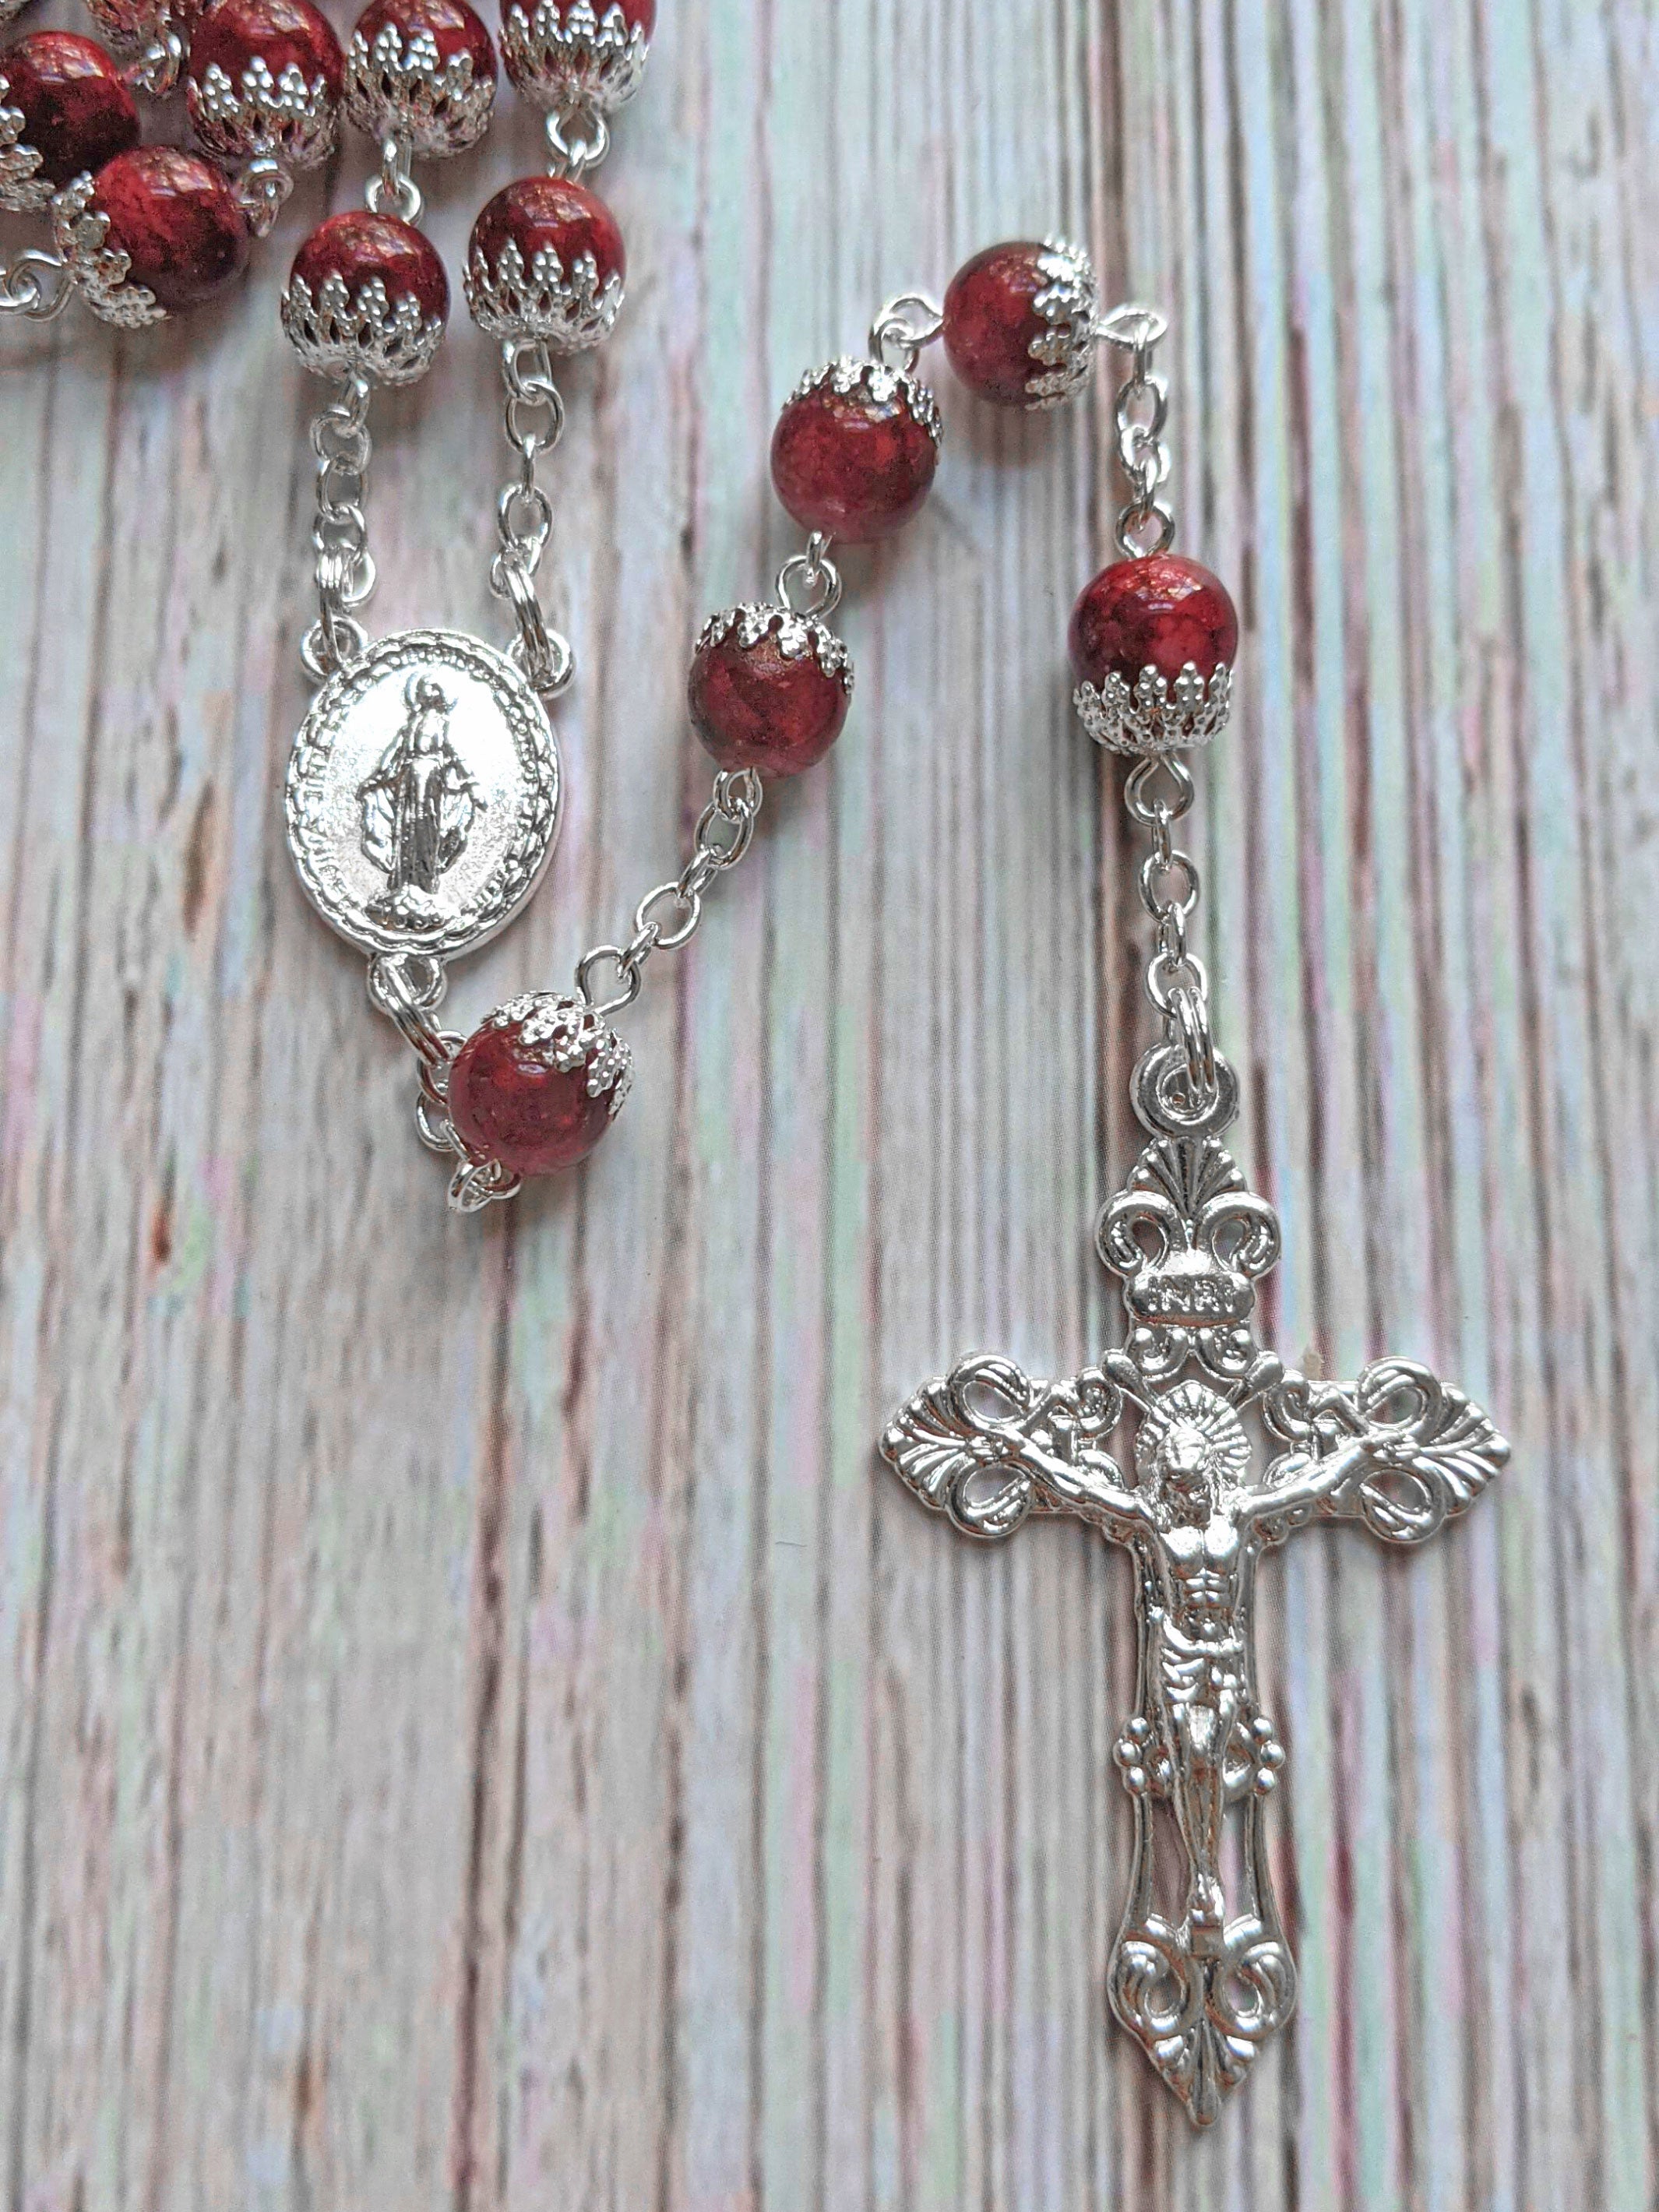 Handmade 8mm Red Glass Beads Our Lady of Fatima Rosary